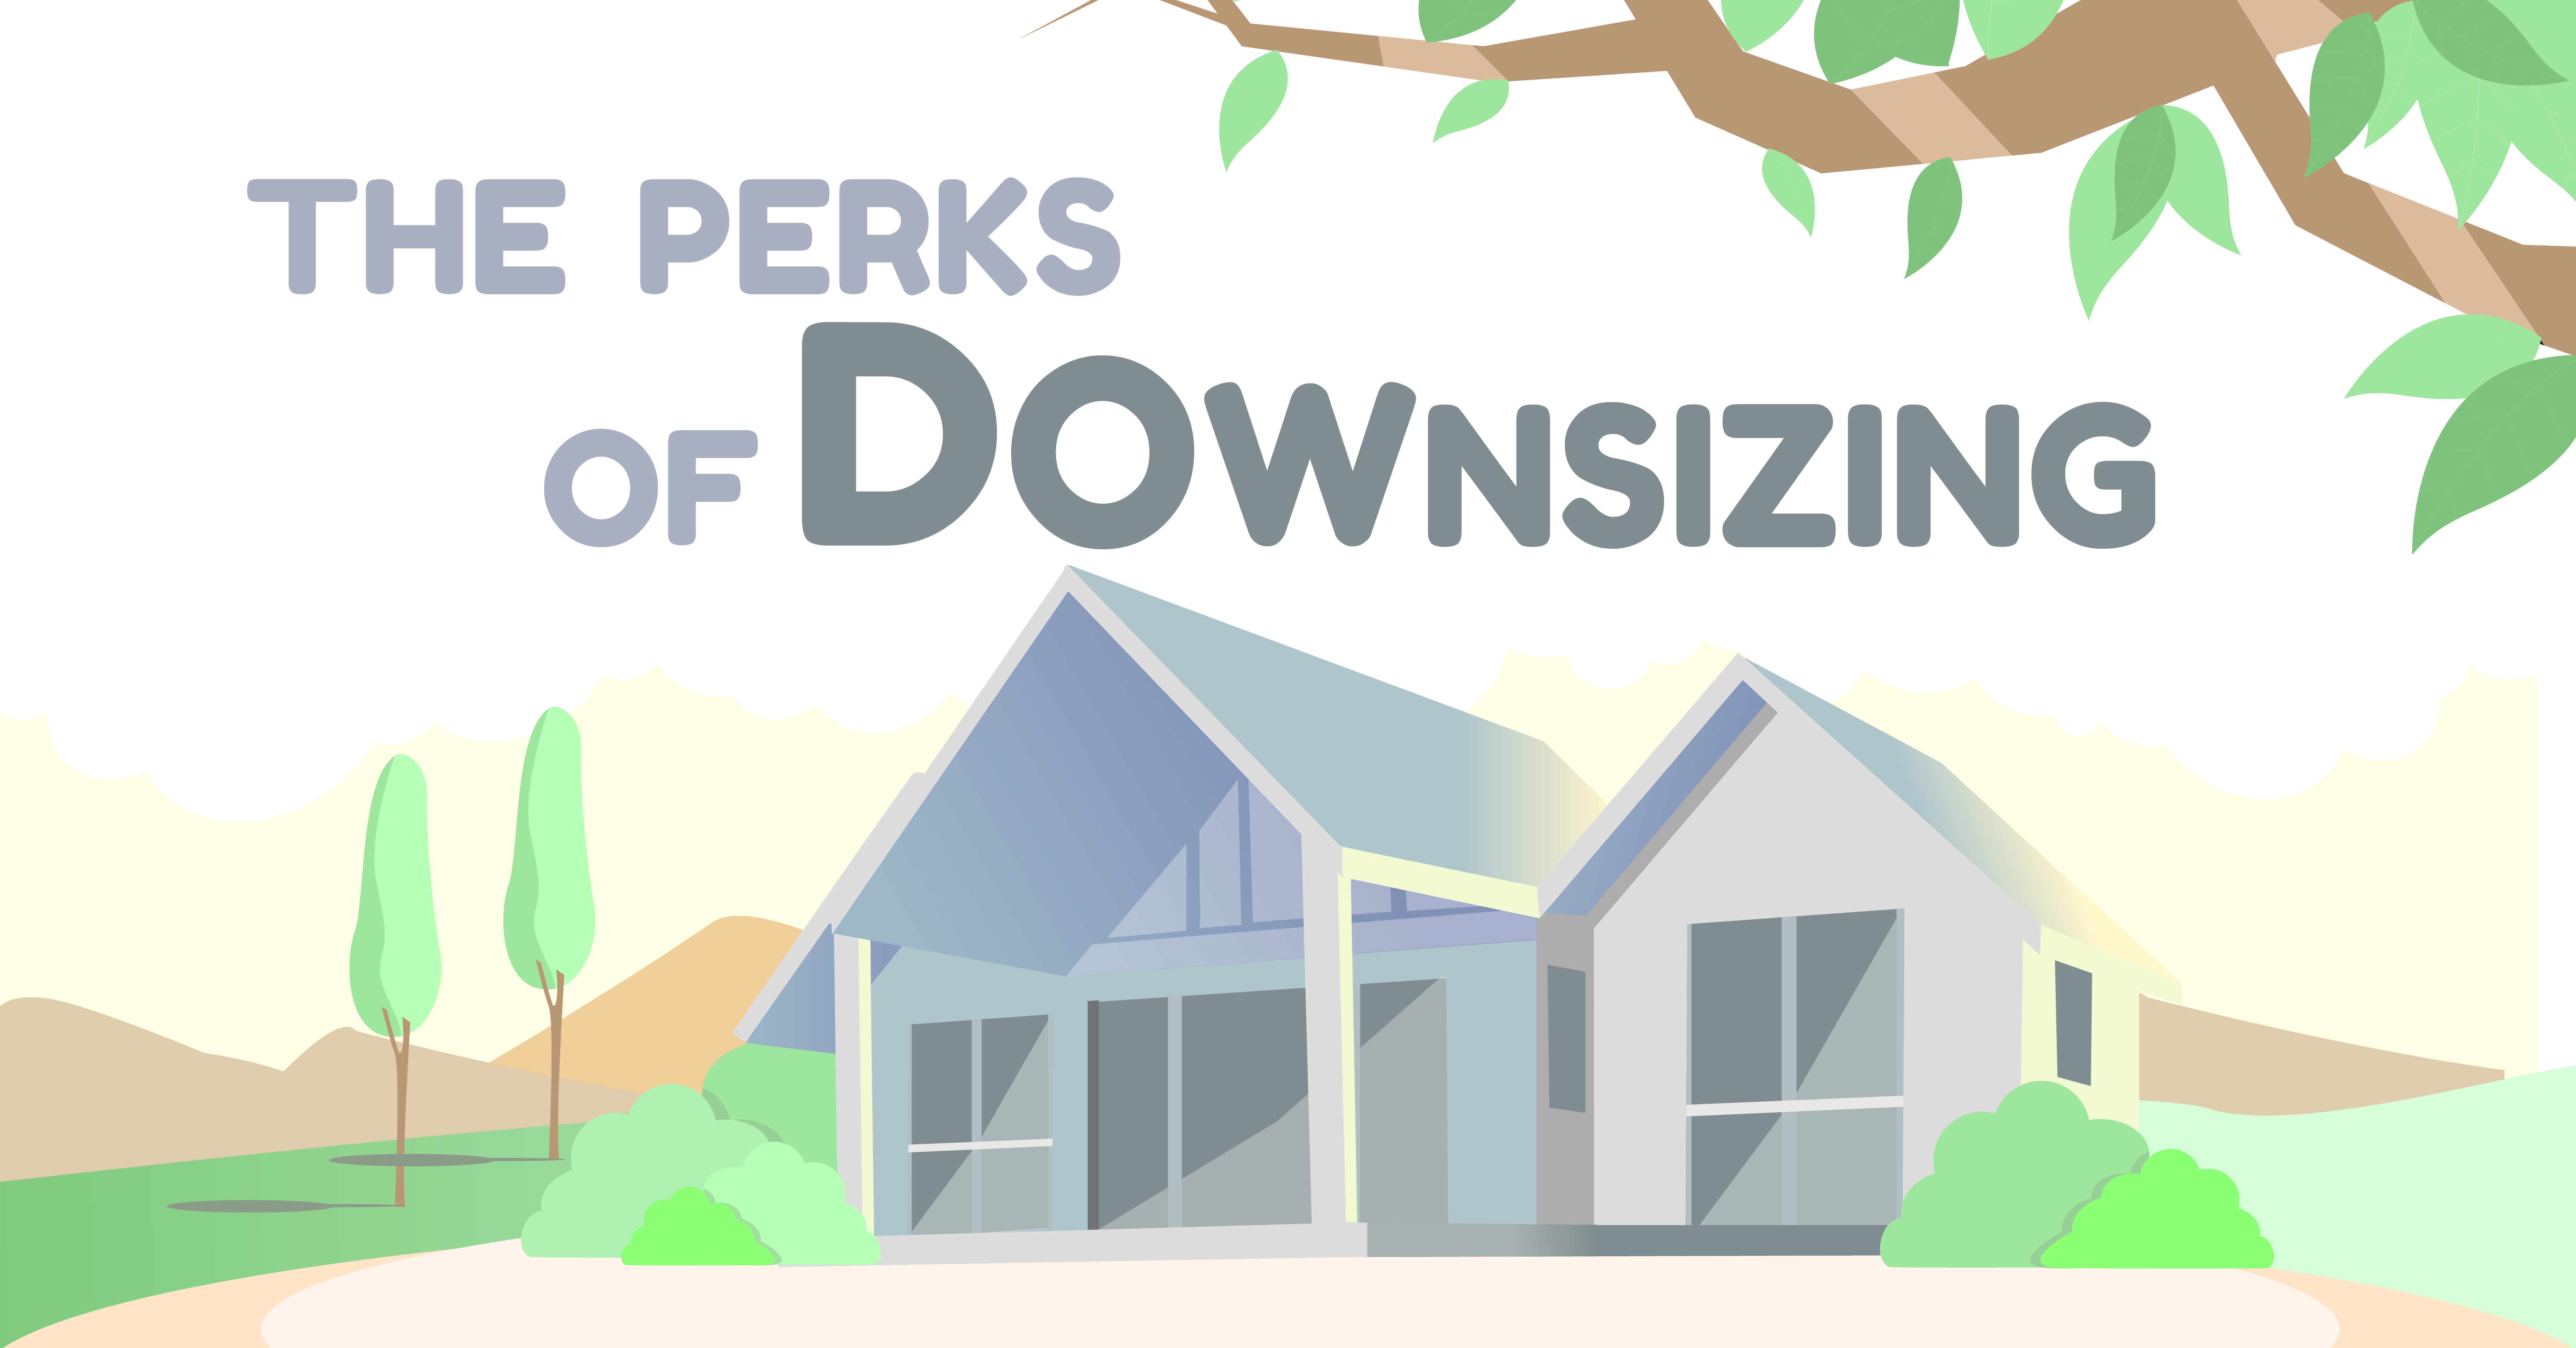 The Perks of Downsizing